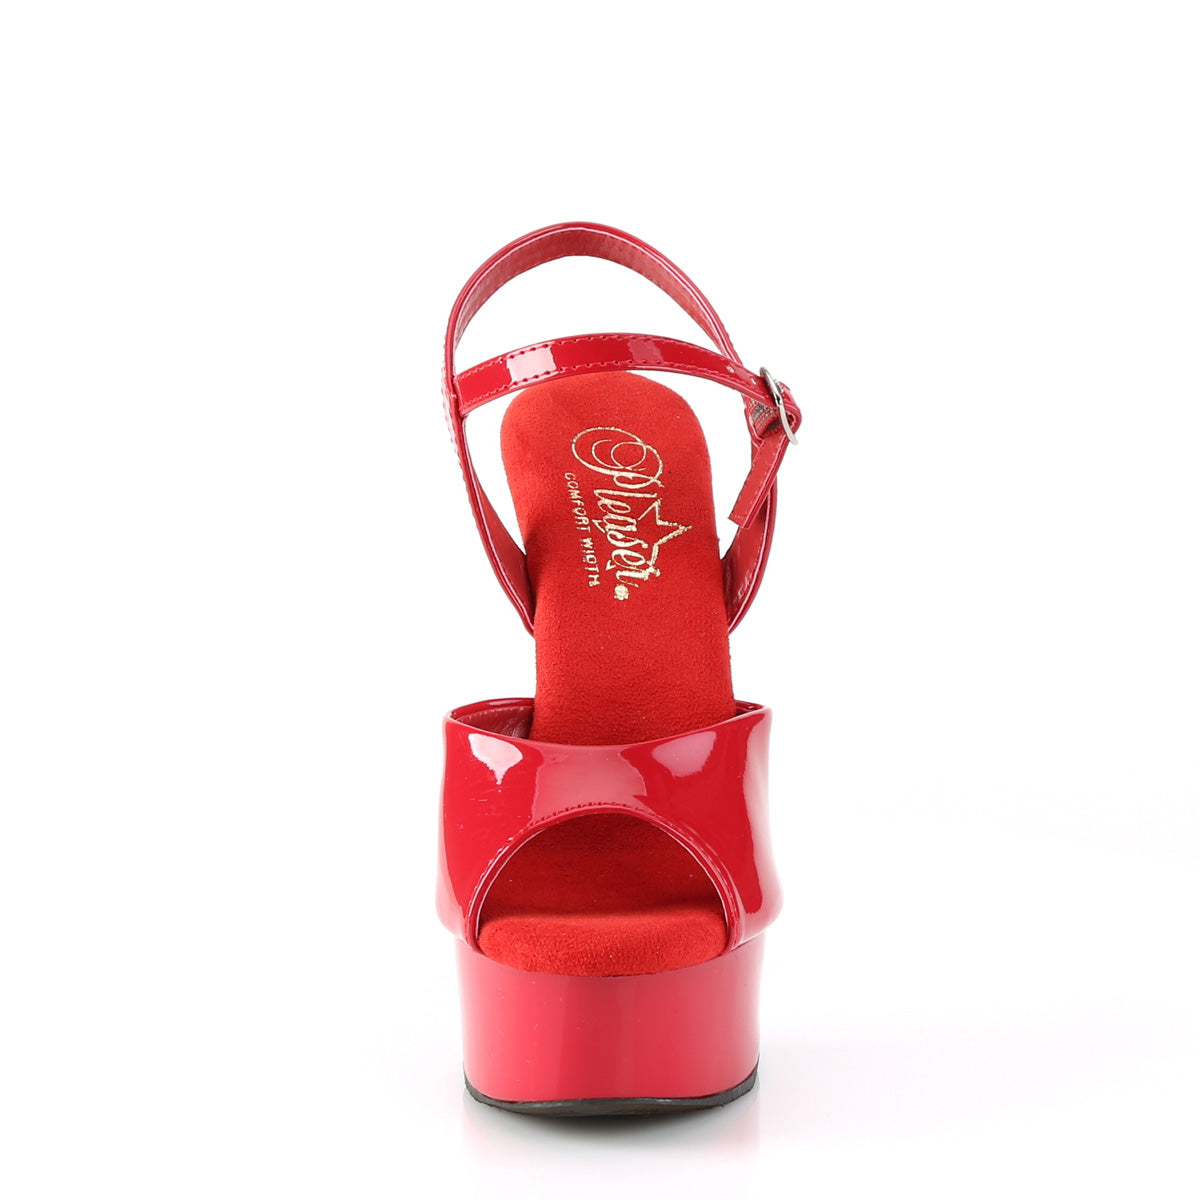 6 Inch Heel EXCITE-609 Red Pat